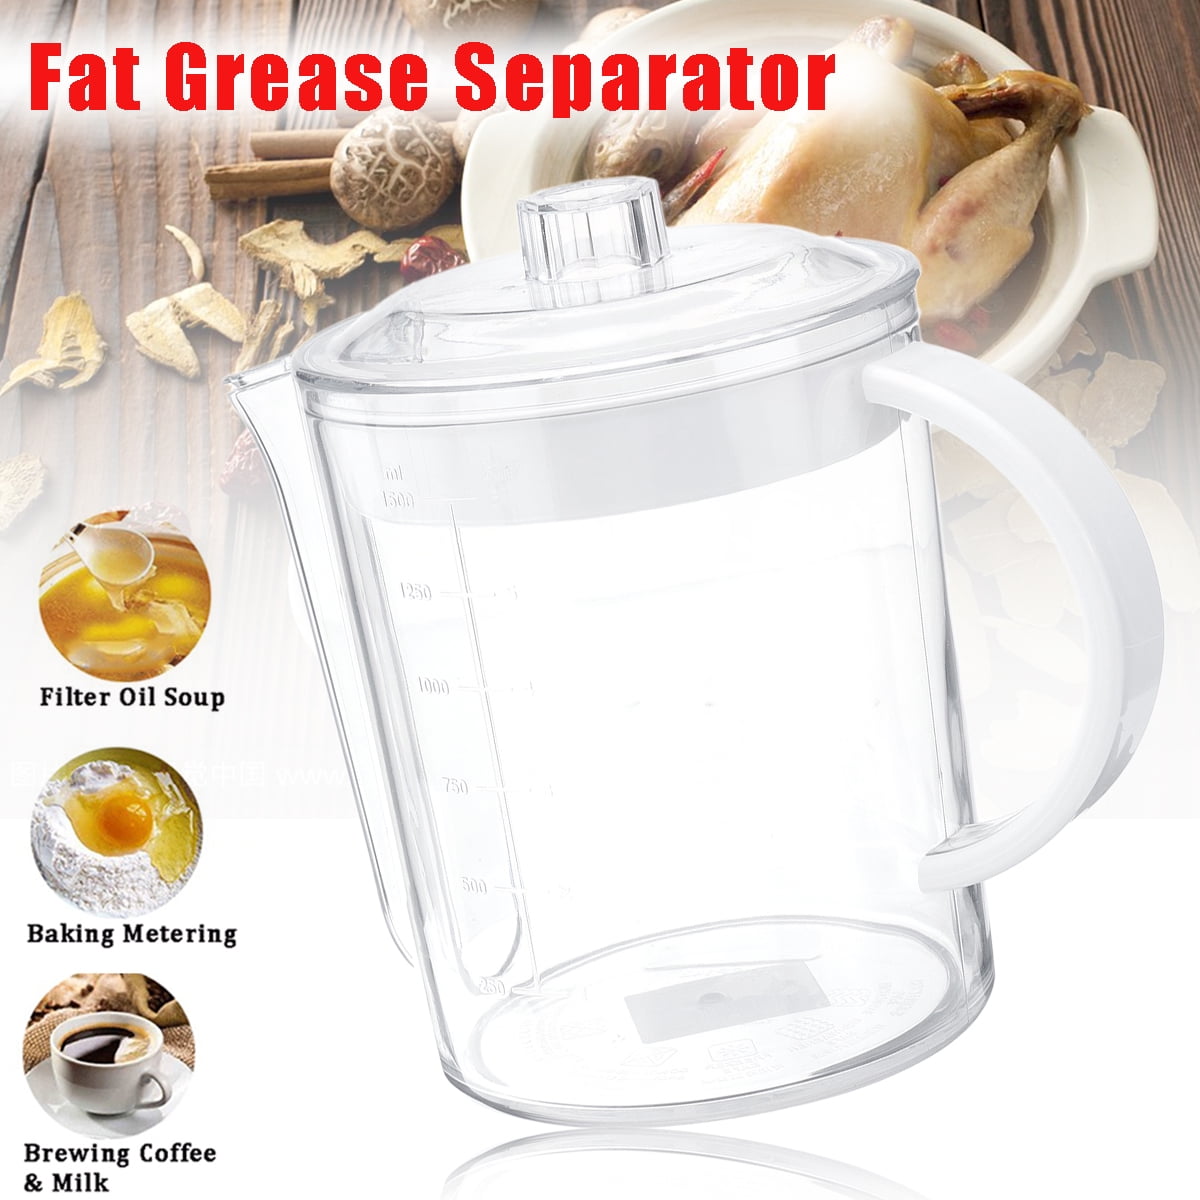 UPKOCH 1500ml Fat Separator Measuring Cup Fat Stopper Oil Gravy Separator  with Strainer Filter for Home Kitchen (White)